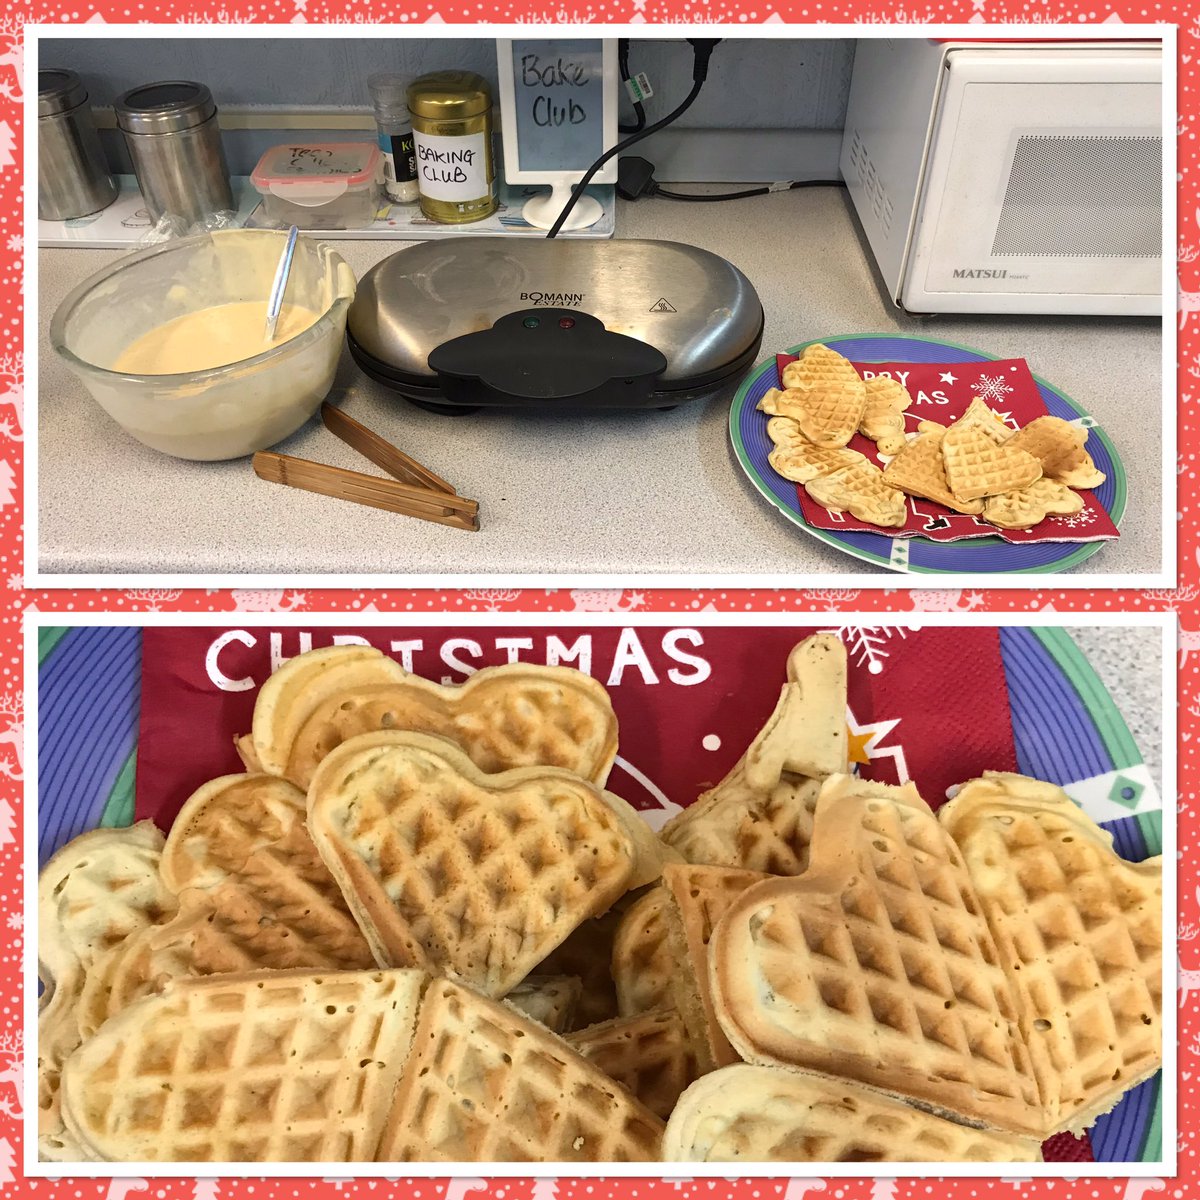 Love heart waffles in staff room this morning. #nearlychristmas @stjosephsabn